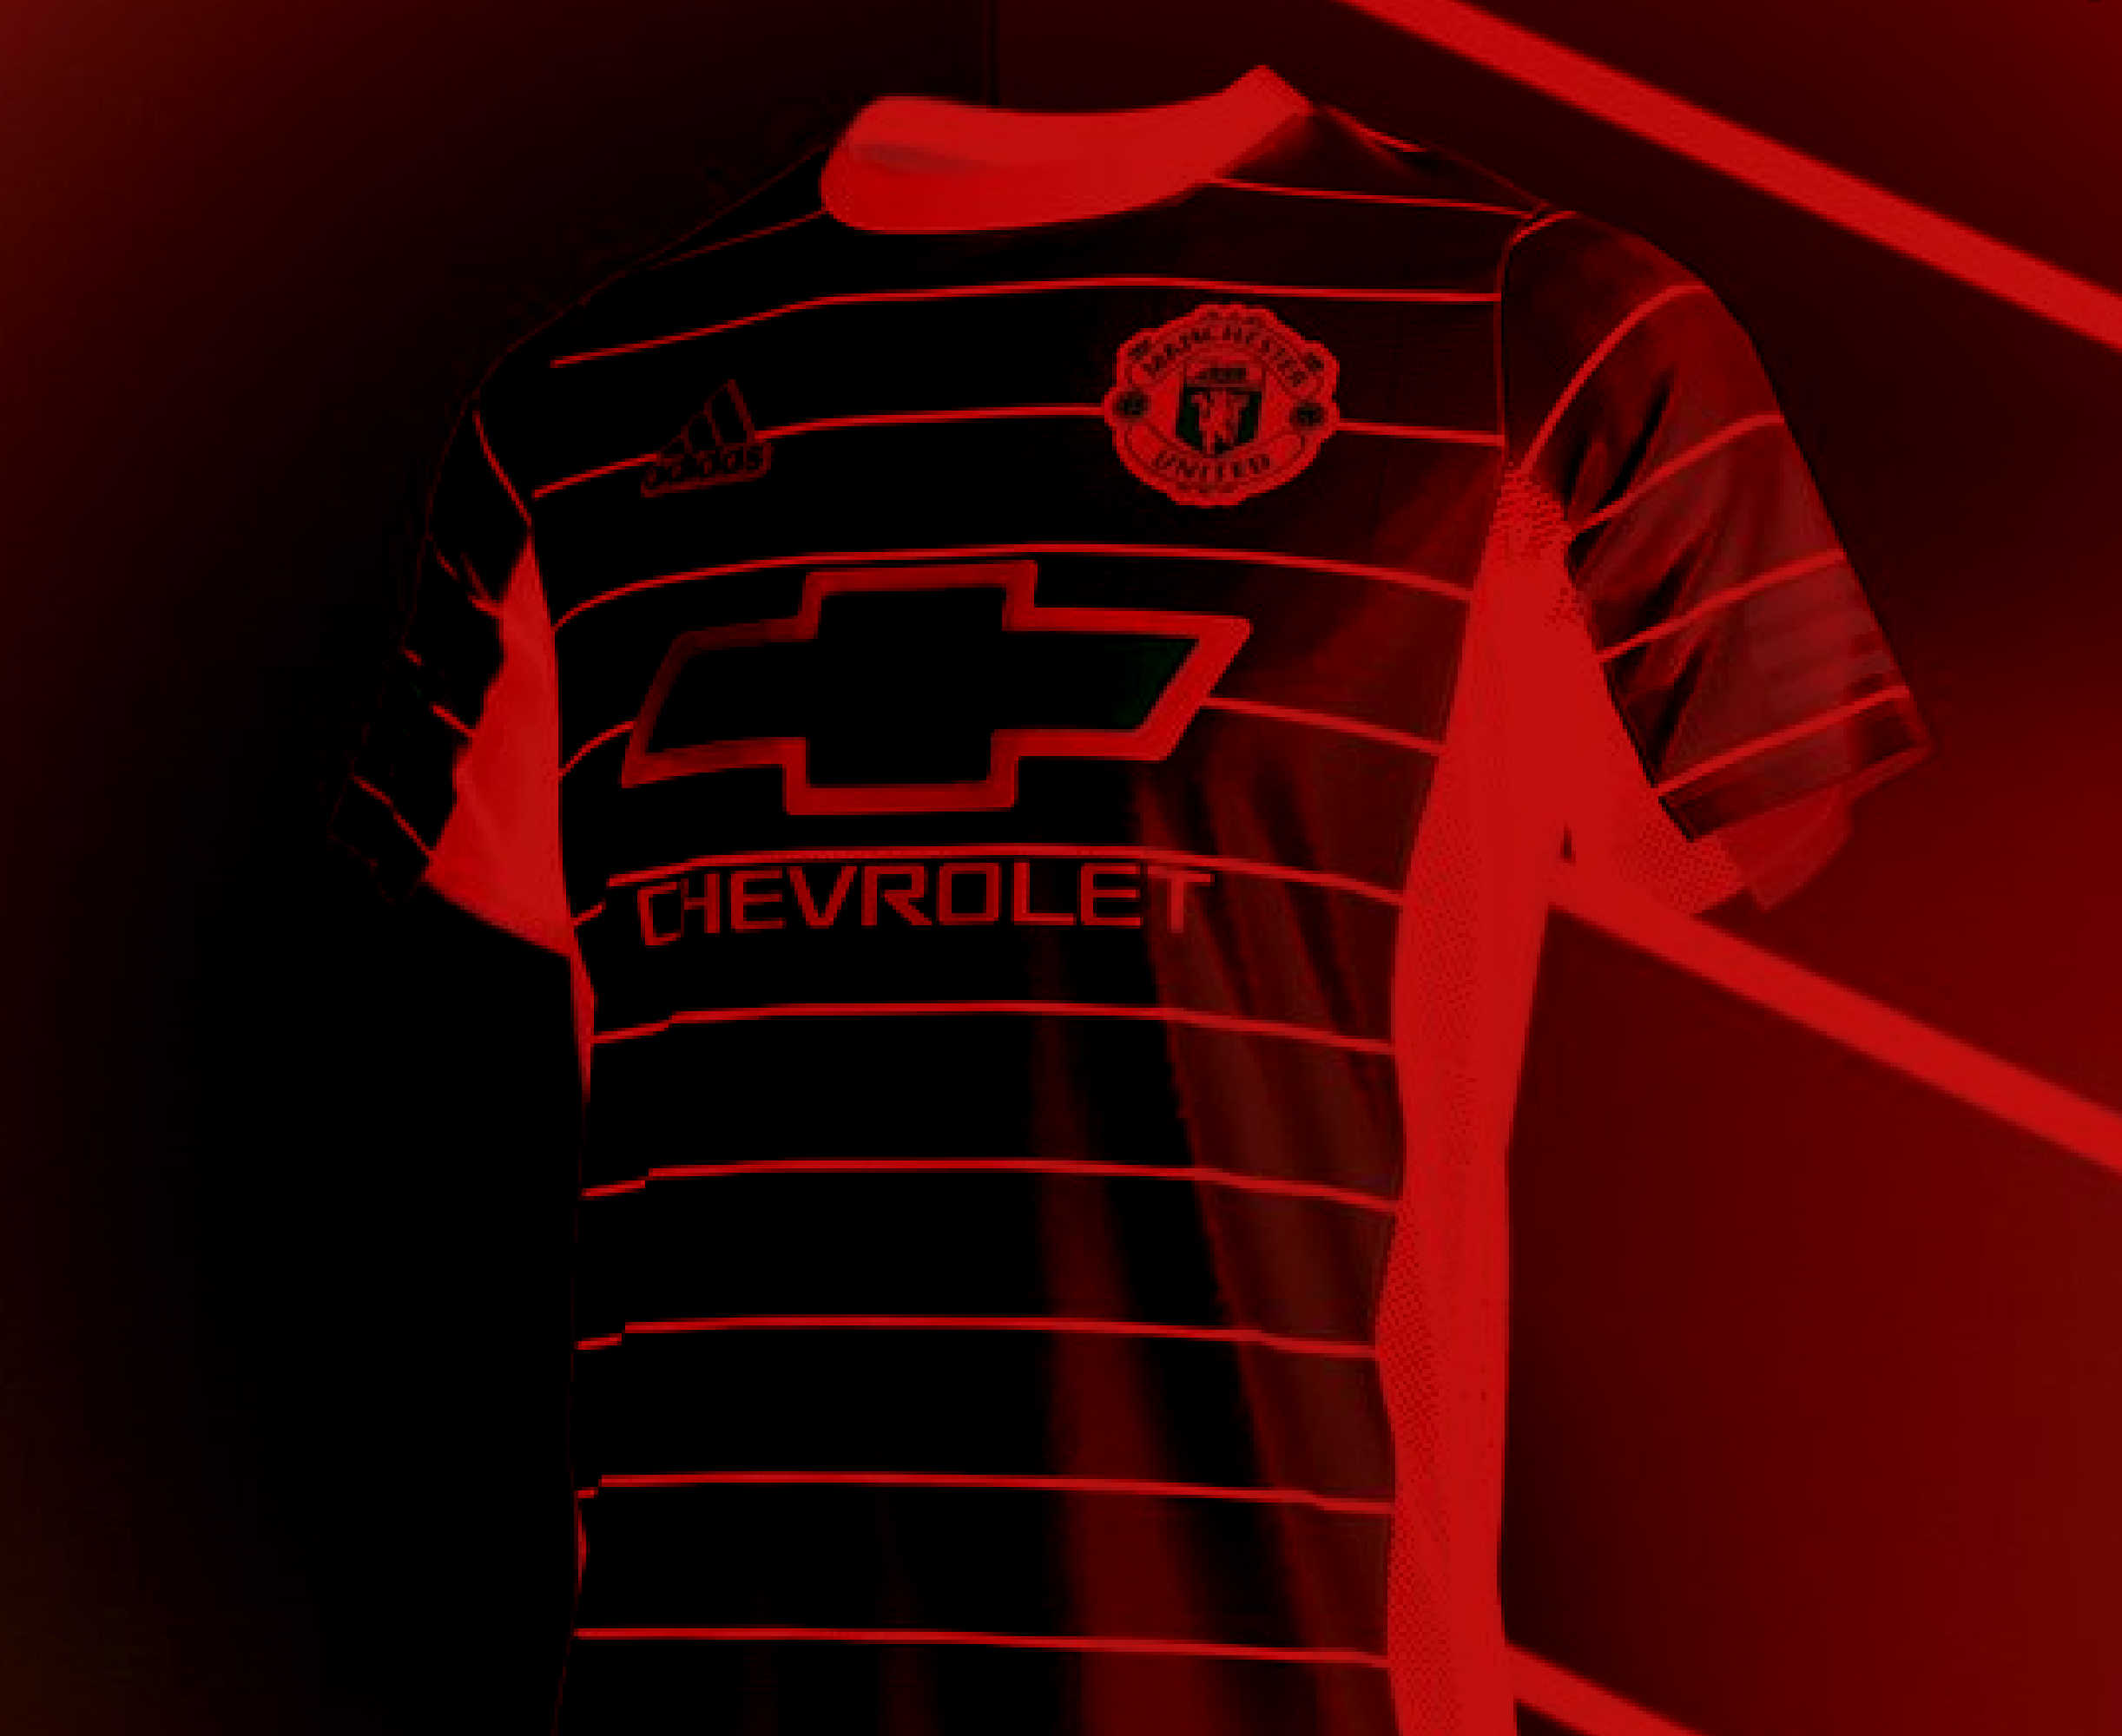 Photo – Designer drops stunning third kit concept for Manchester United